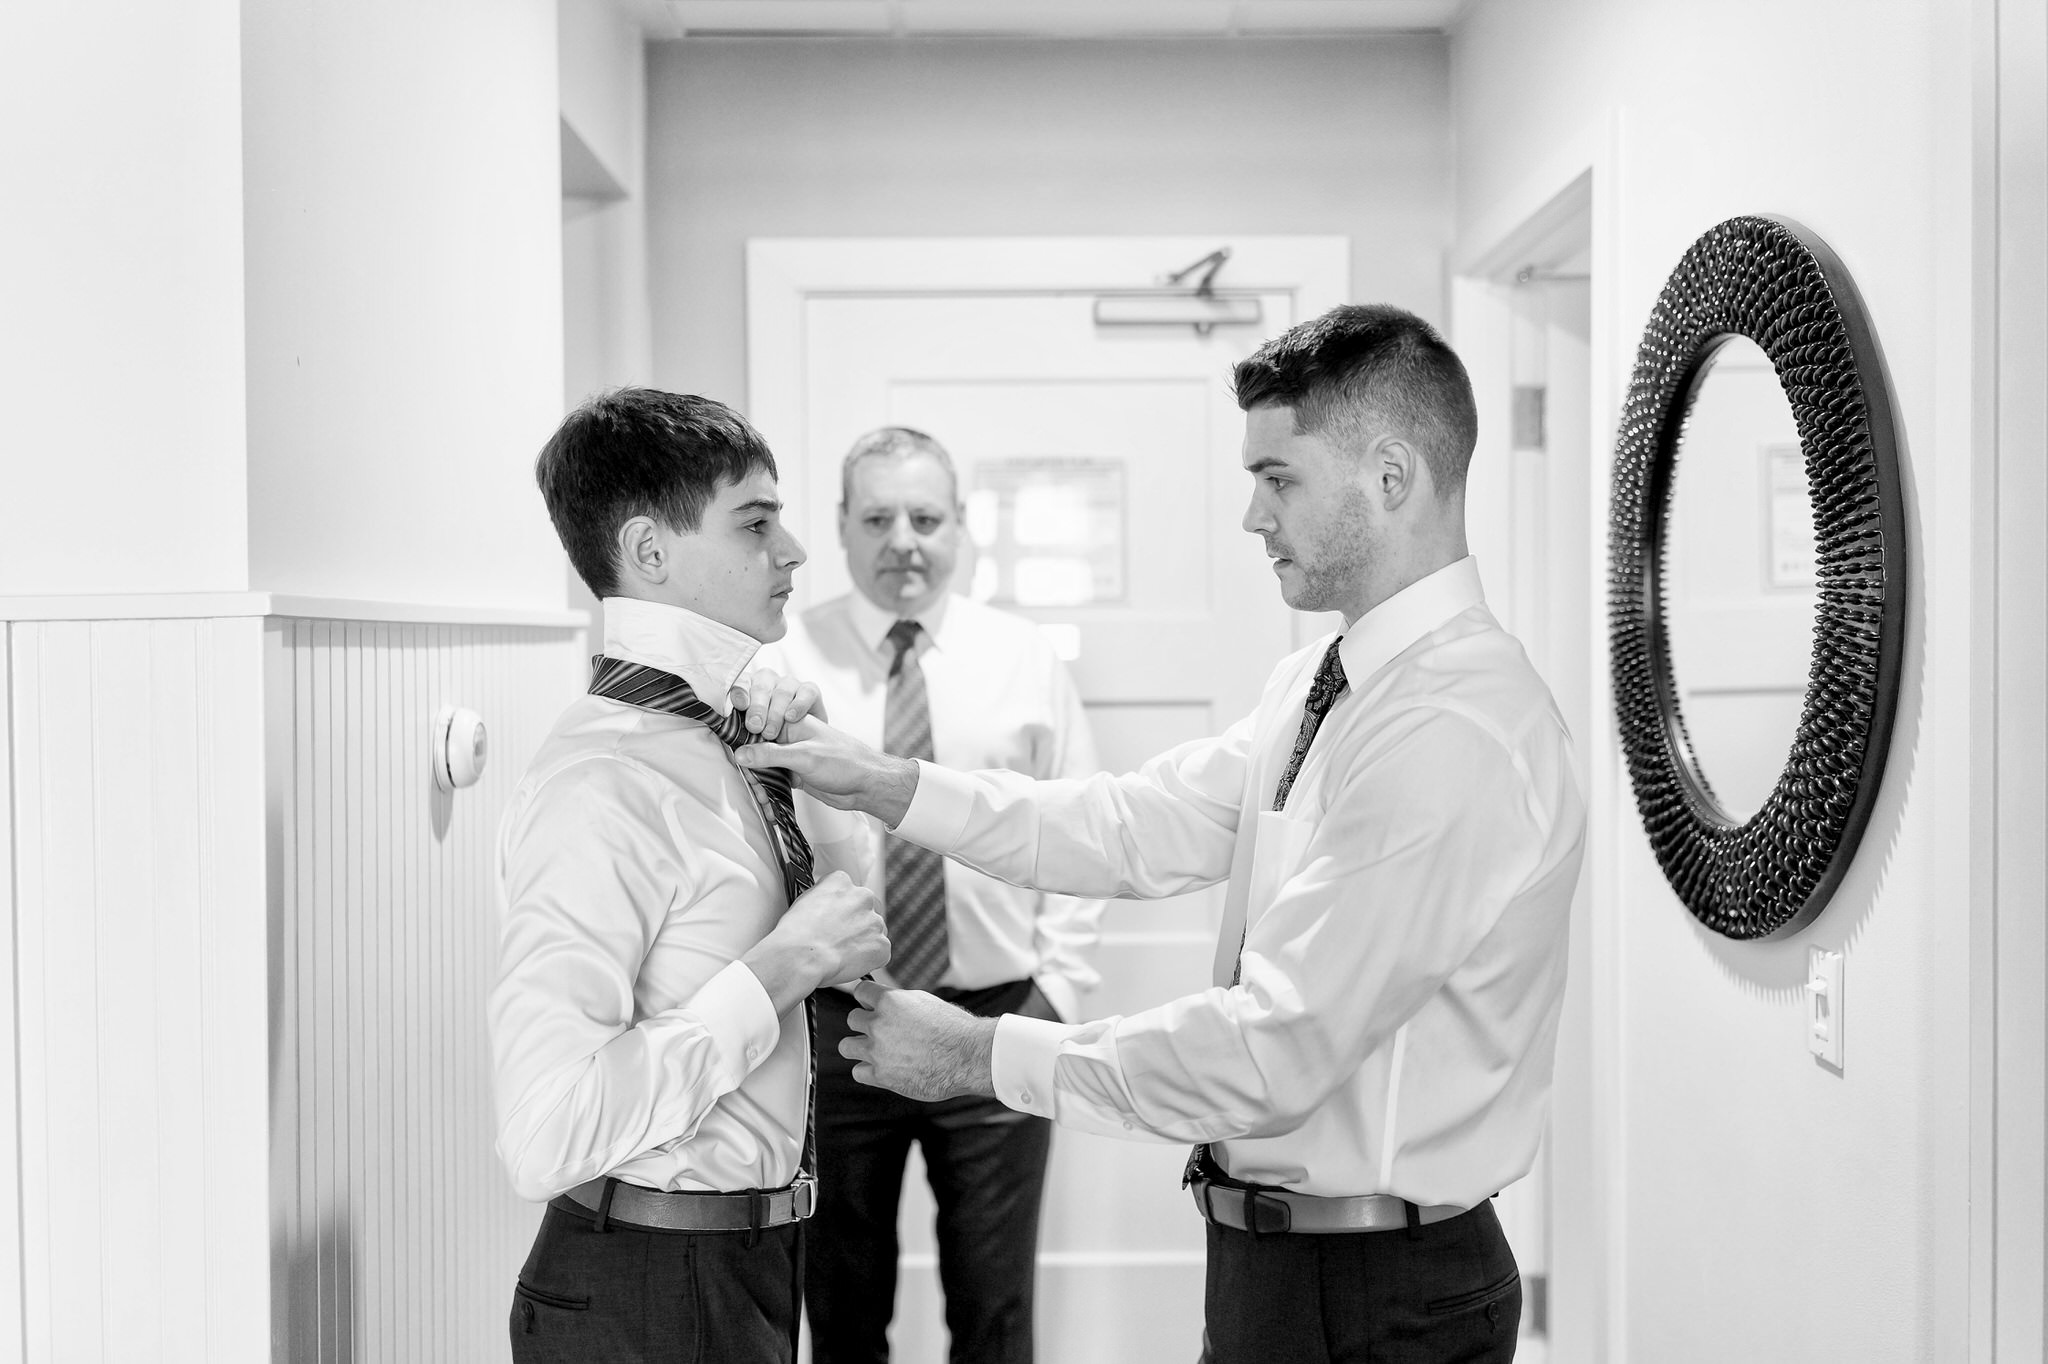 Older brother helping adjust his brother's tie while their dad watches.  